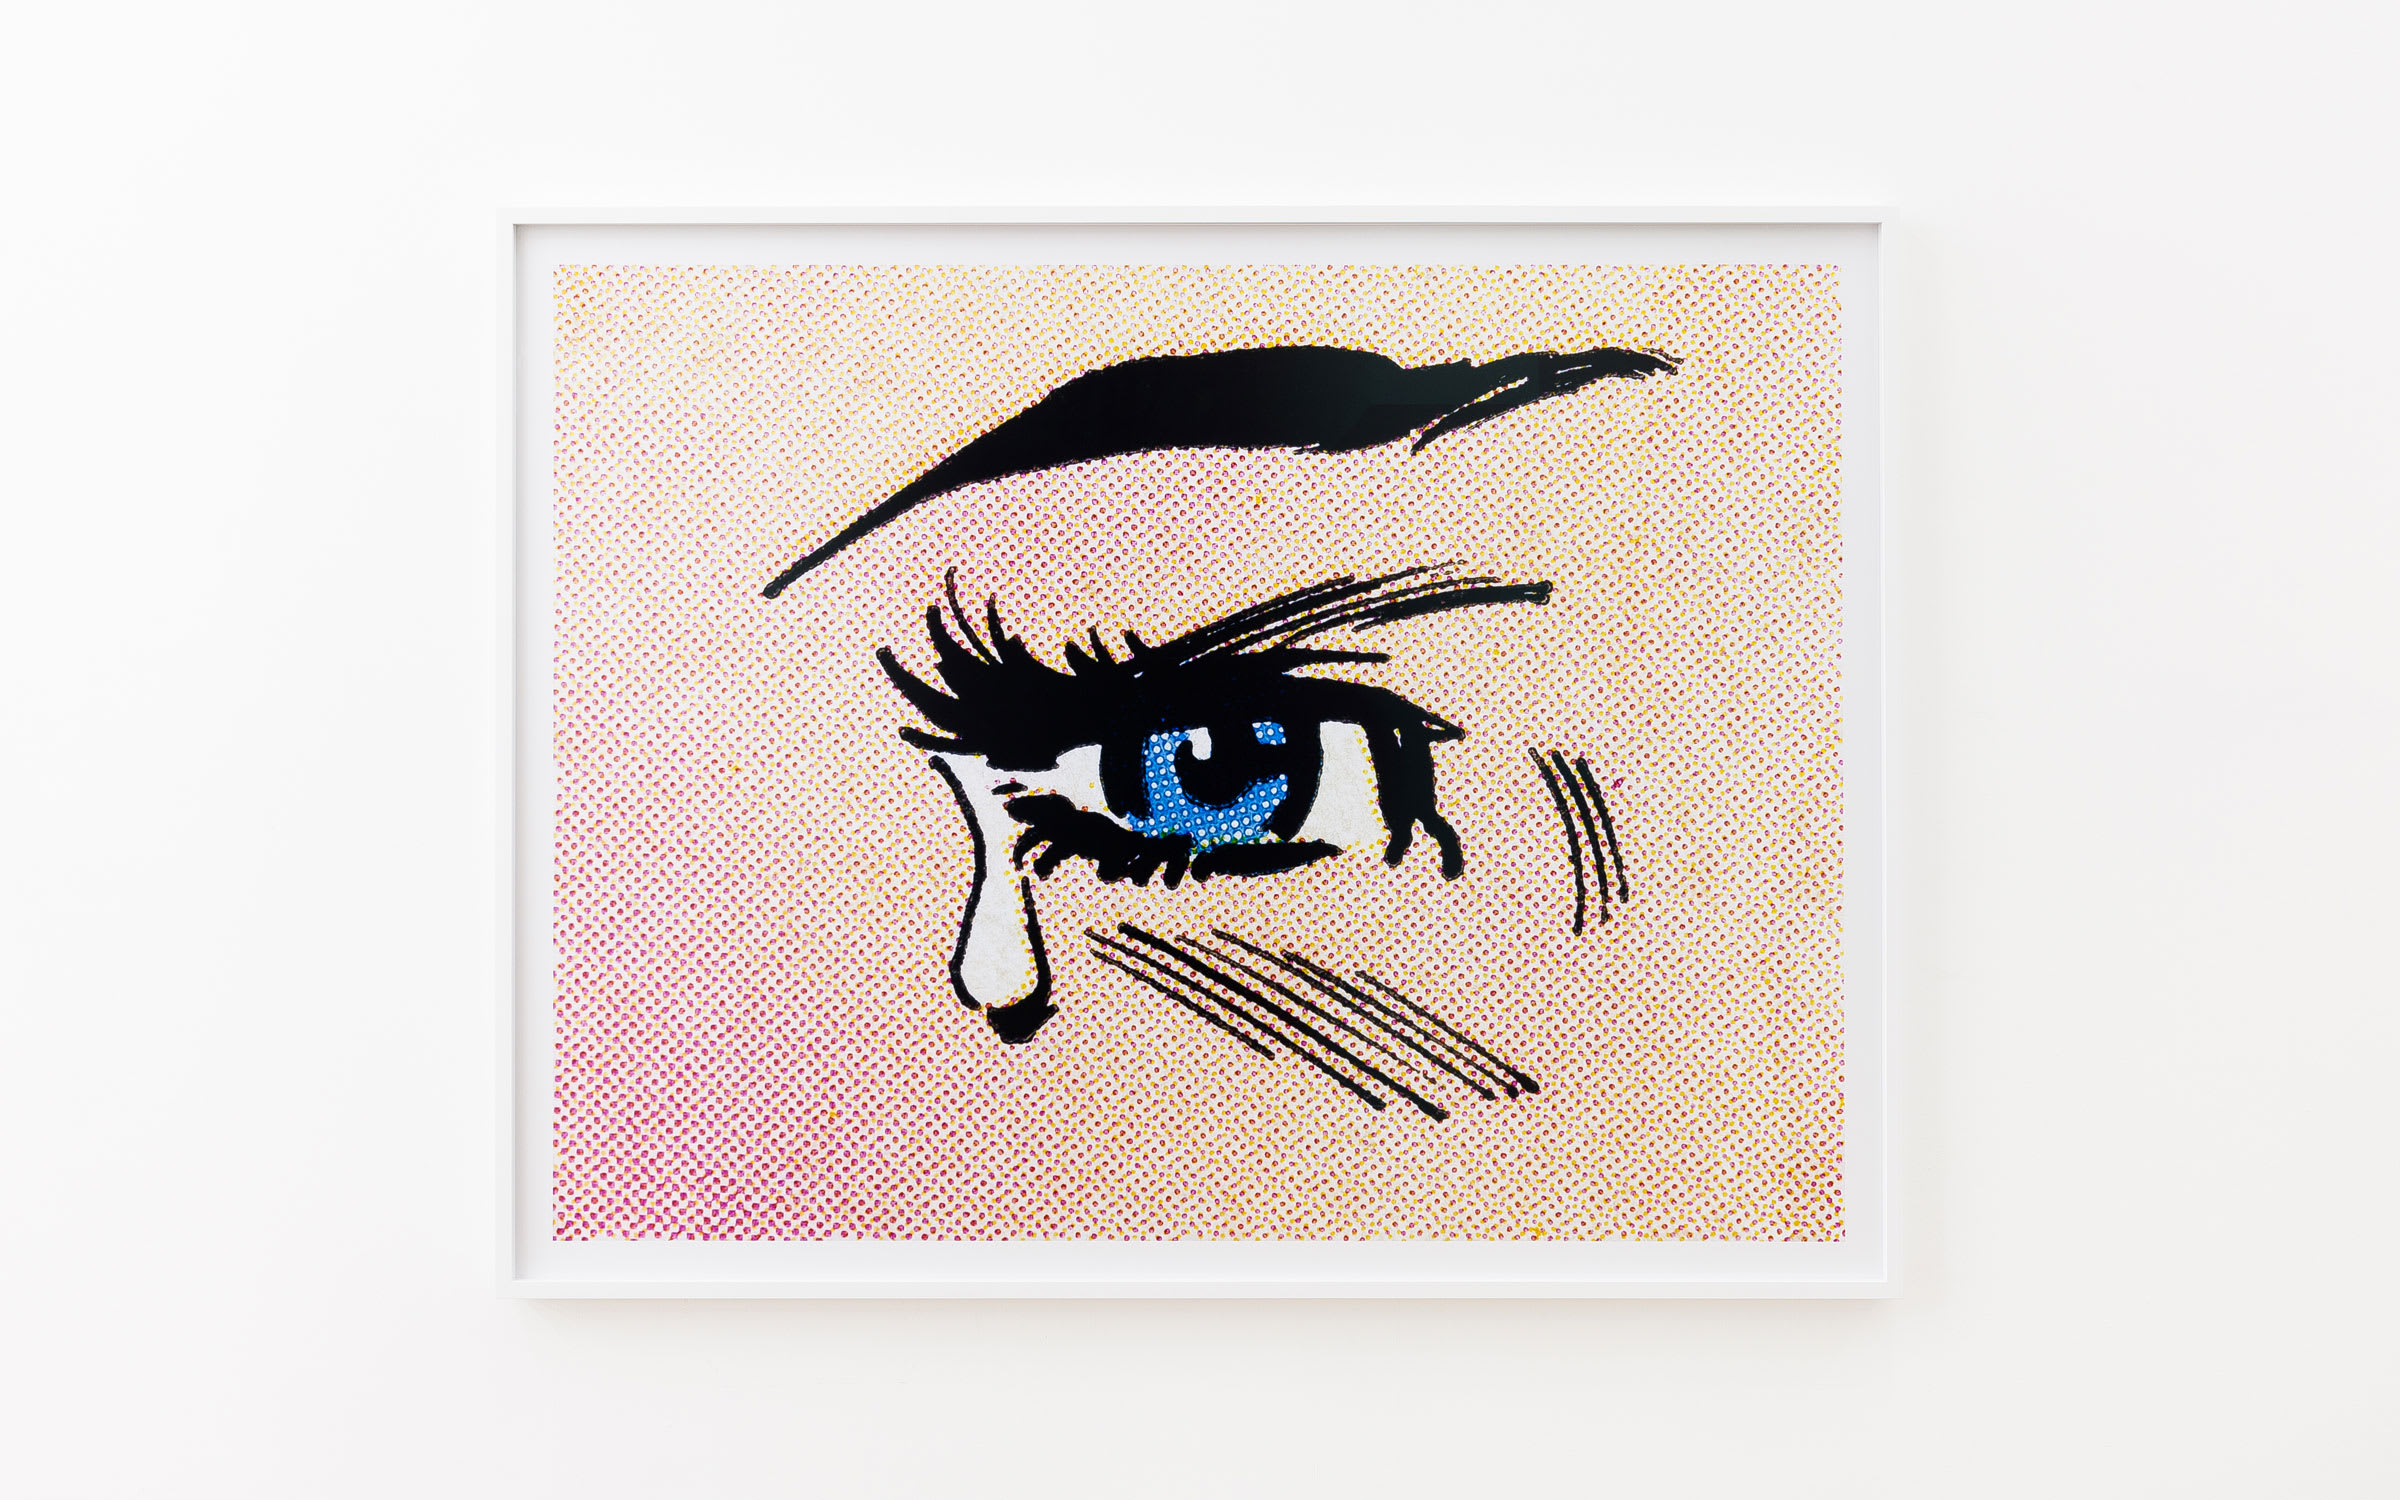 Anne Collier, Woman Crying (Comic) #28, 2020. Courtesy of the artist and The Modern Institute/Toby Webster Ltd, Glasgow. Photo by Patrick Jameson.